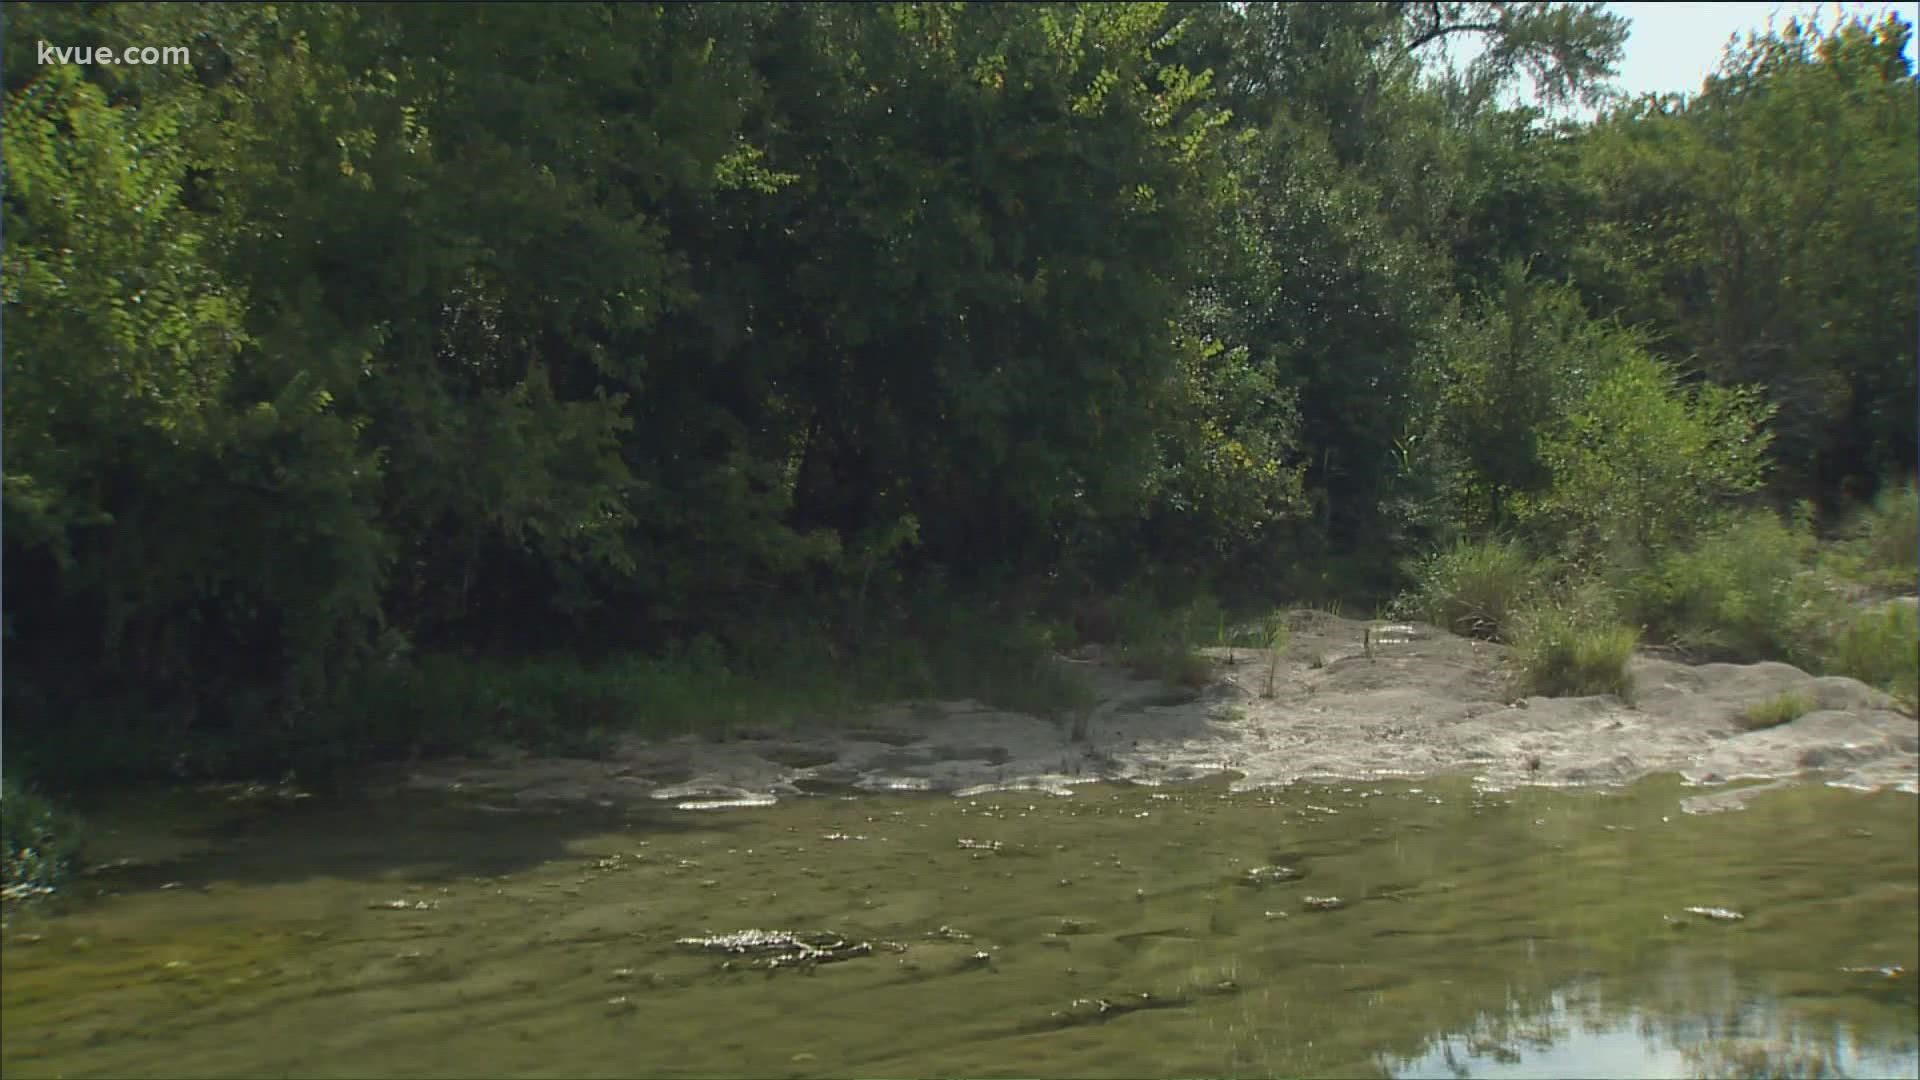 The infant's body was discovered by a fisherman off of Old San Antonio Road, near Onion Creek, on Aug. 25.